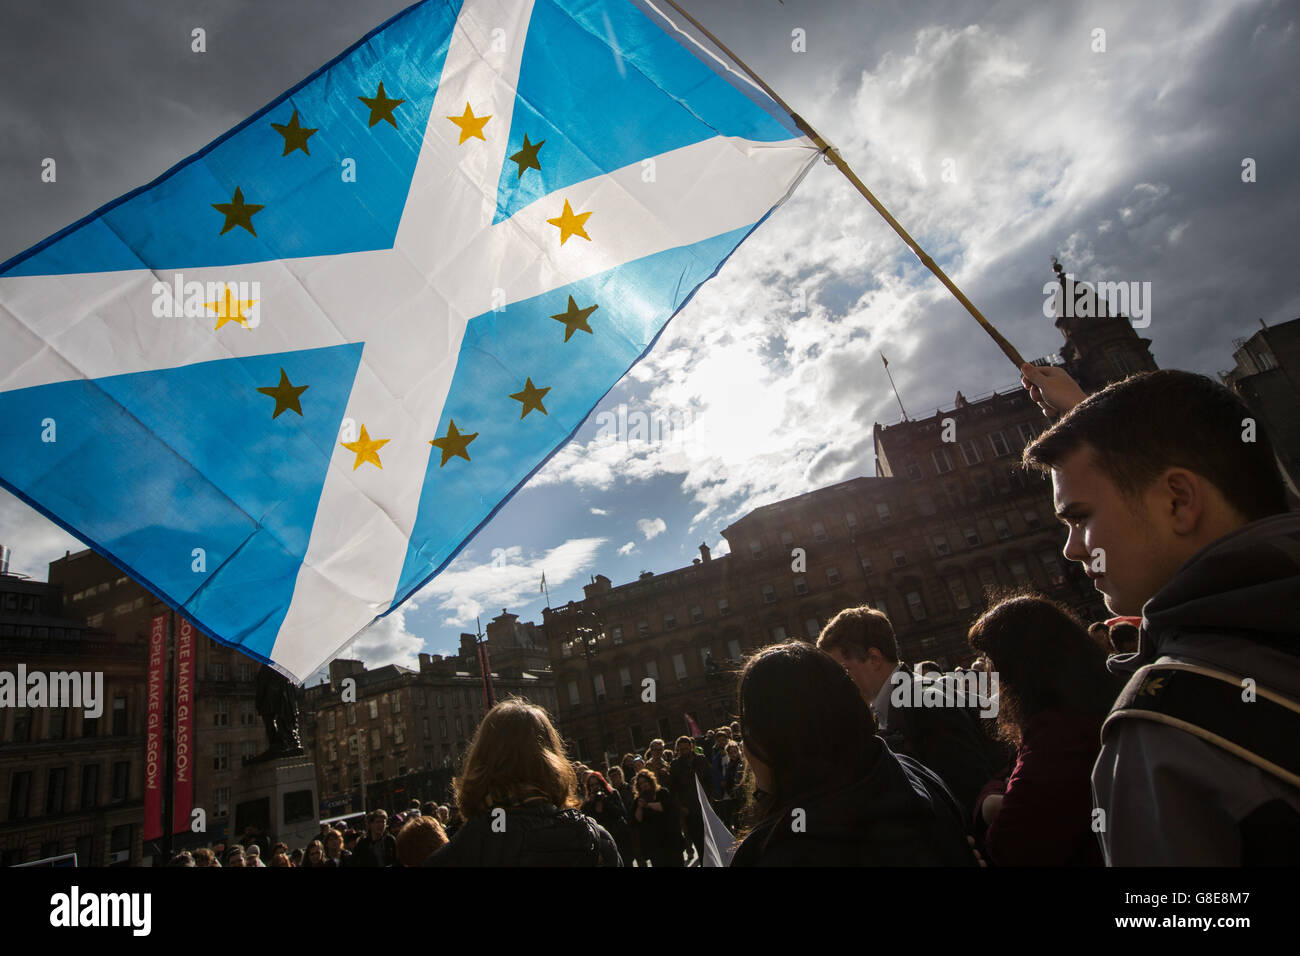 Glasgow, Scotland, UK. 29th June, 2016. Scottish Pro-European Union supporters gather for a rally in George Square, Glasgow, Scotland, on 29 June 2016. Credit:  jeremy sutton-hibbert/Alamy Live News Stock Photo